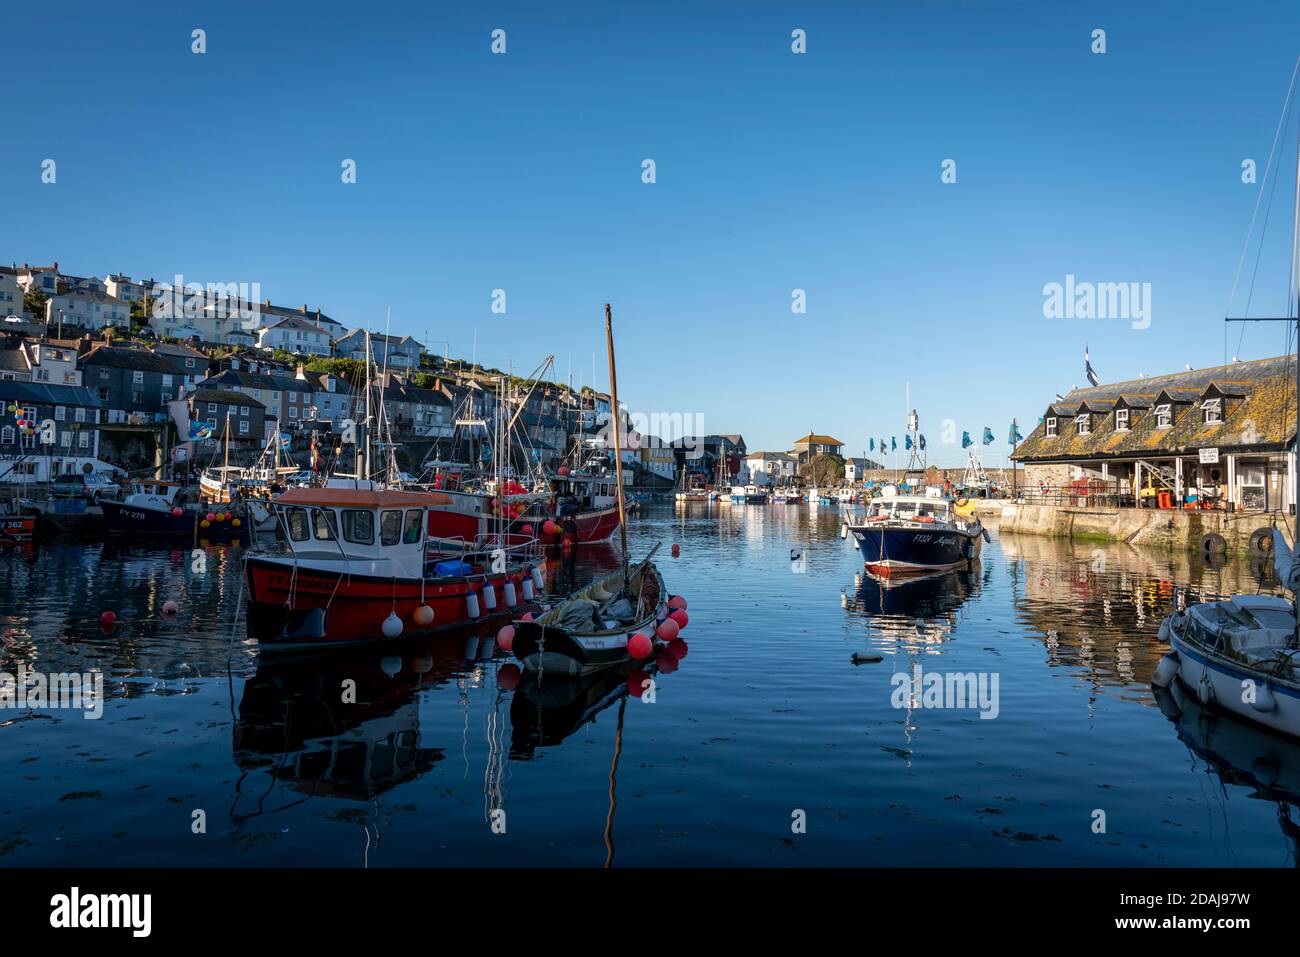 Boats in Mevagissey Harbour, Cornwall, UK Stock Photo